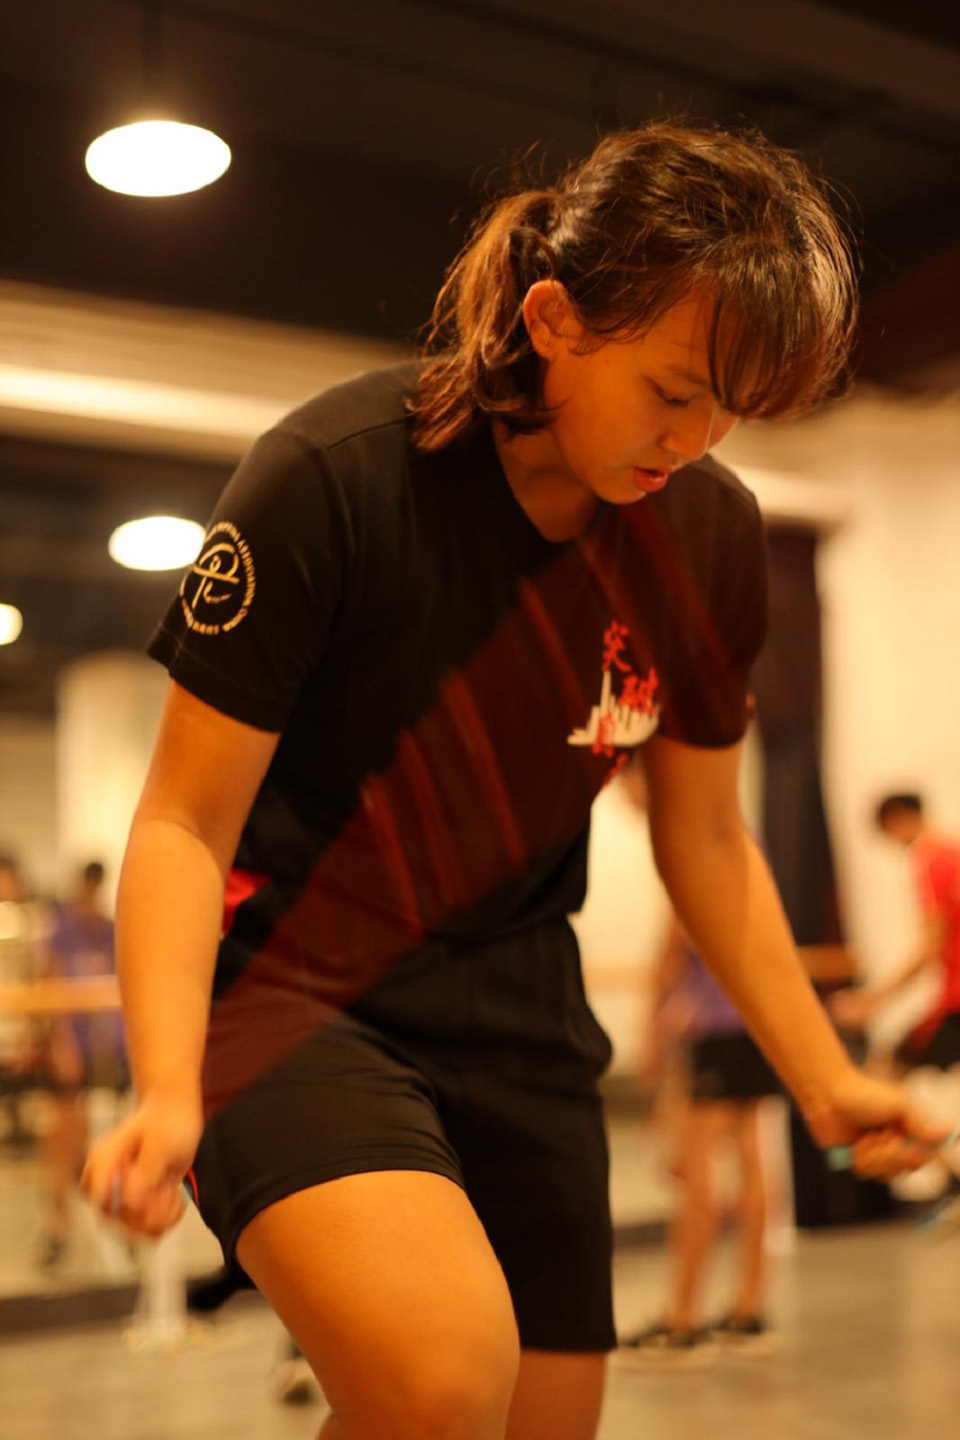 Another awardee is WONG Lok-ching, who graduated from IVE with a Higher Diploma in Sports Administration. A member of the Hong Kong Rope Skipping representative team, she won one gold medal, two silvers and one bronze in the IJRU Virtual World Championship Series. She has now started a bachelor’s degree in Sports and Recreation Management at a local university